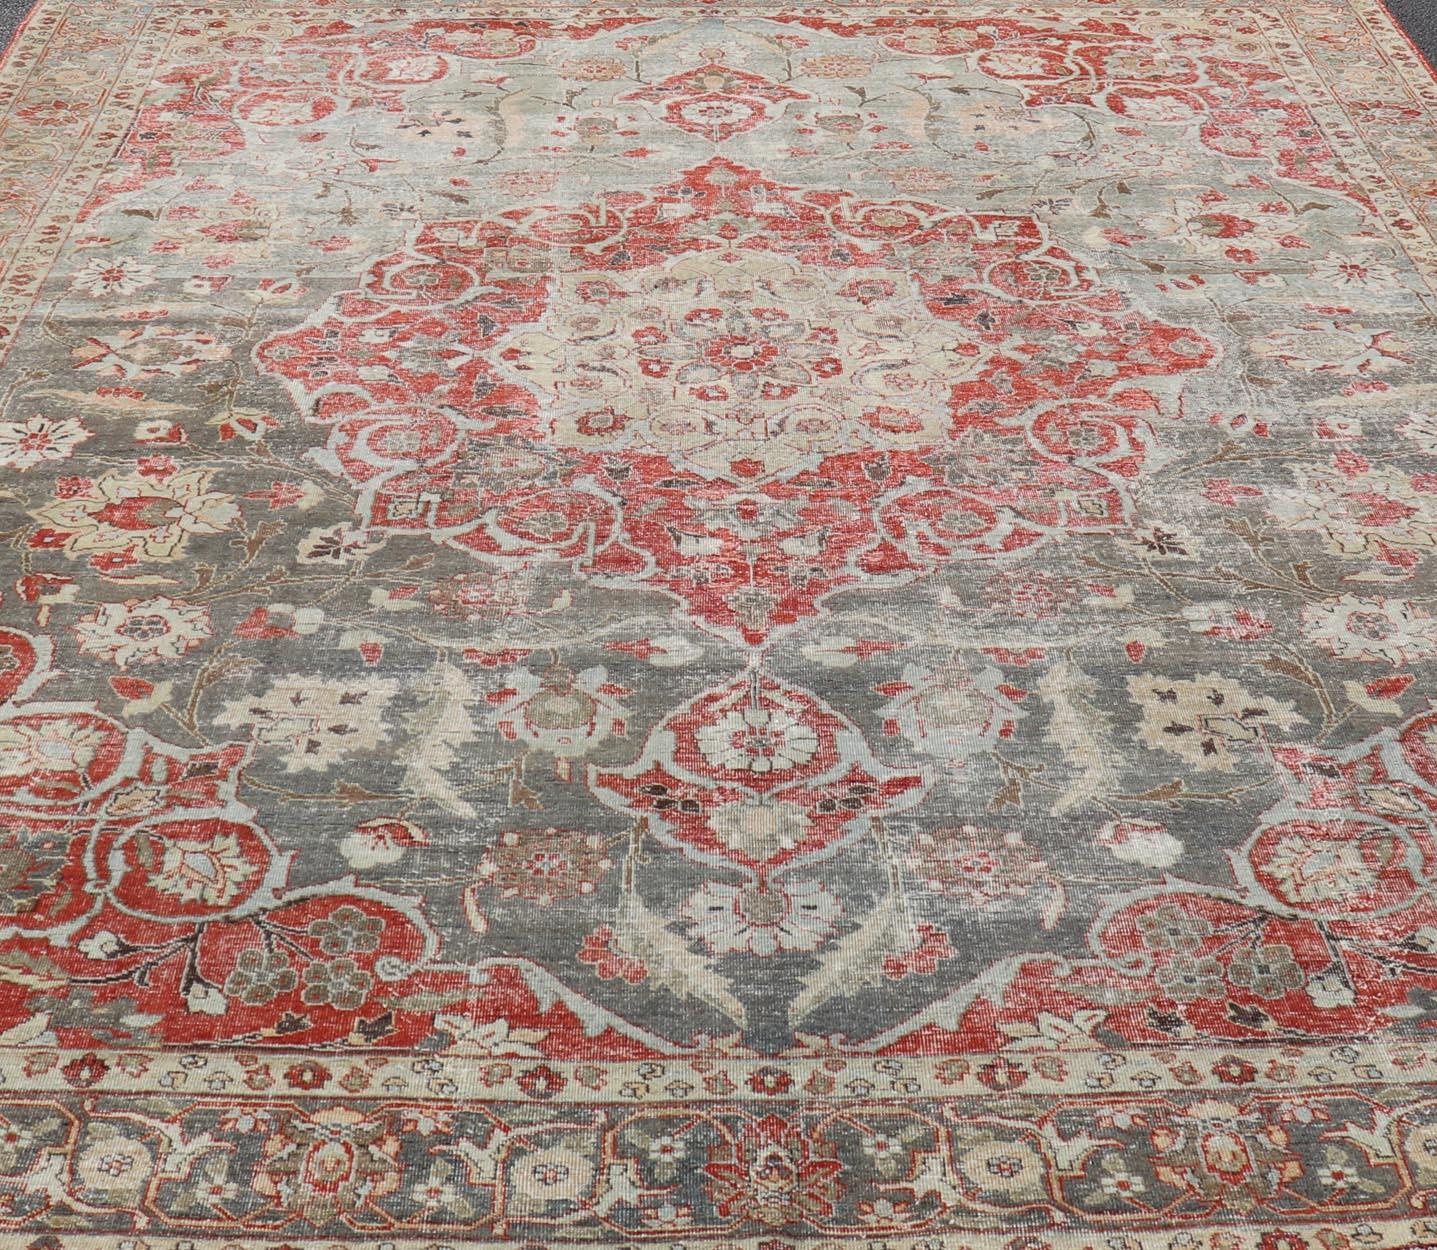 Antique Persian Tabriz Rug with Floral Medallion Design in Tan, Red, and Lt Blue In Good Condition For Sale In Atlanta, GA